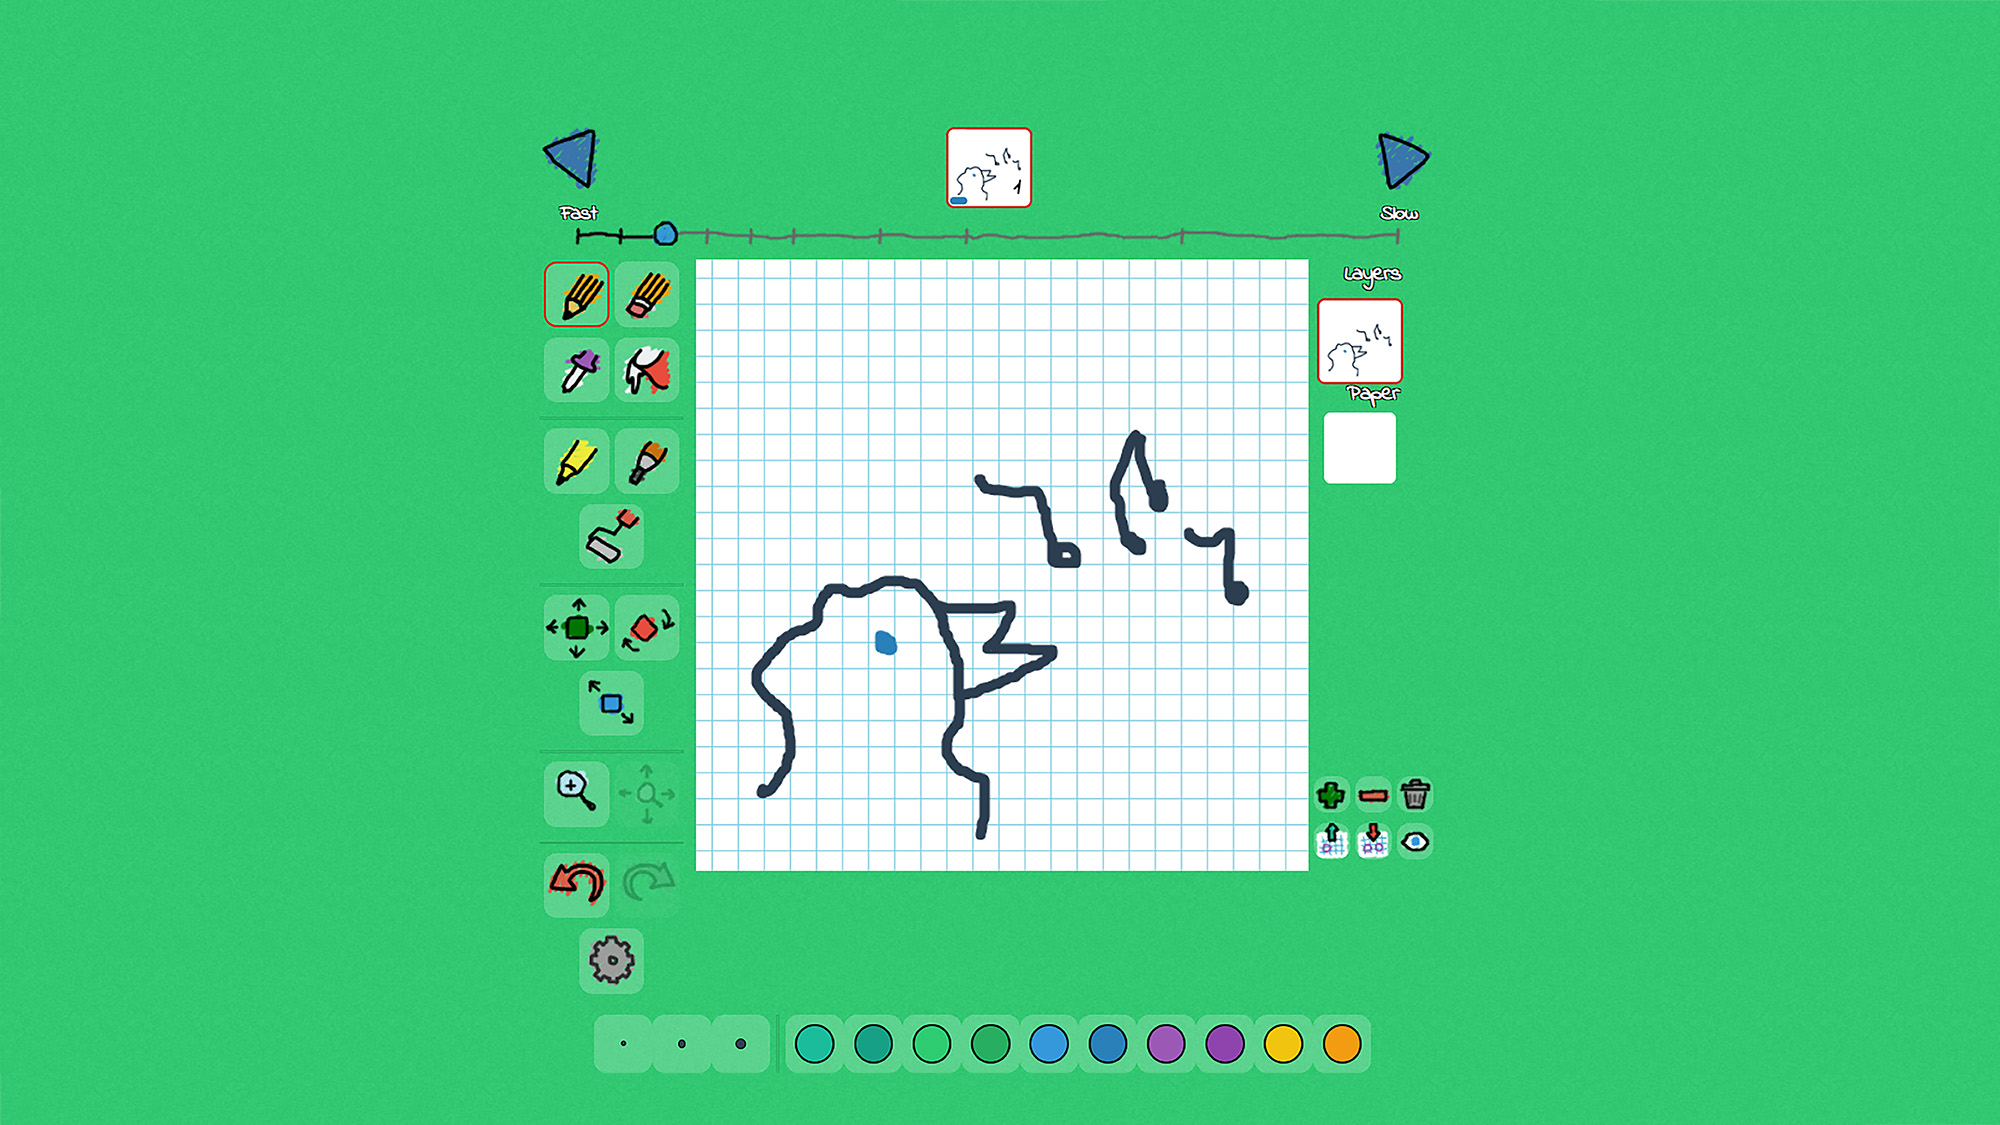 The user interface displays a digitally sketched bird chirping notes on a checkered background. Around the workspace with the sketch there are various tool icons to be used for the editing process.